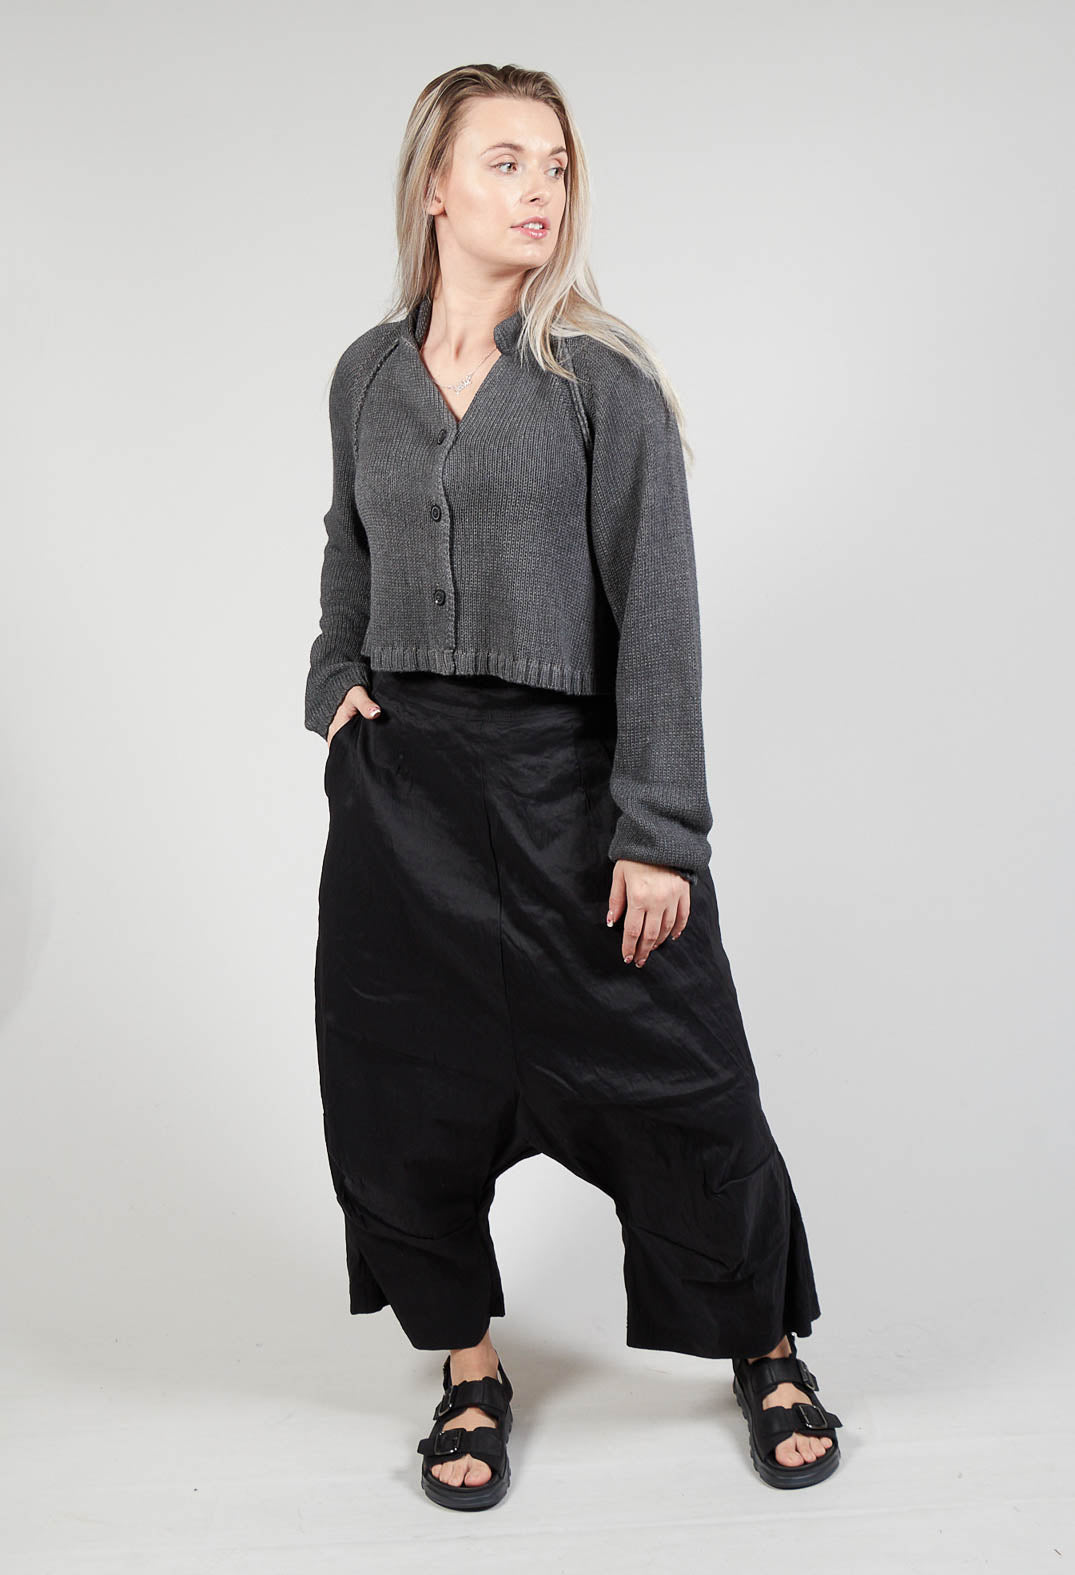 Textured Culottes in Black